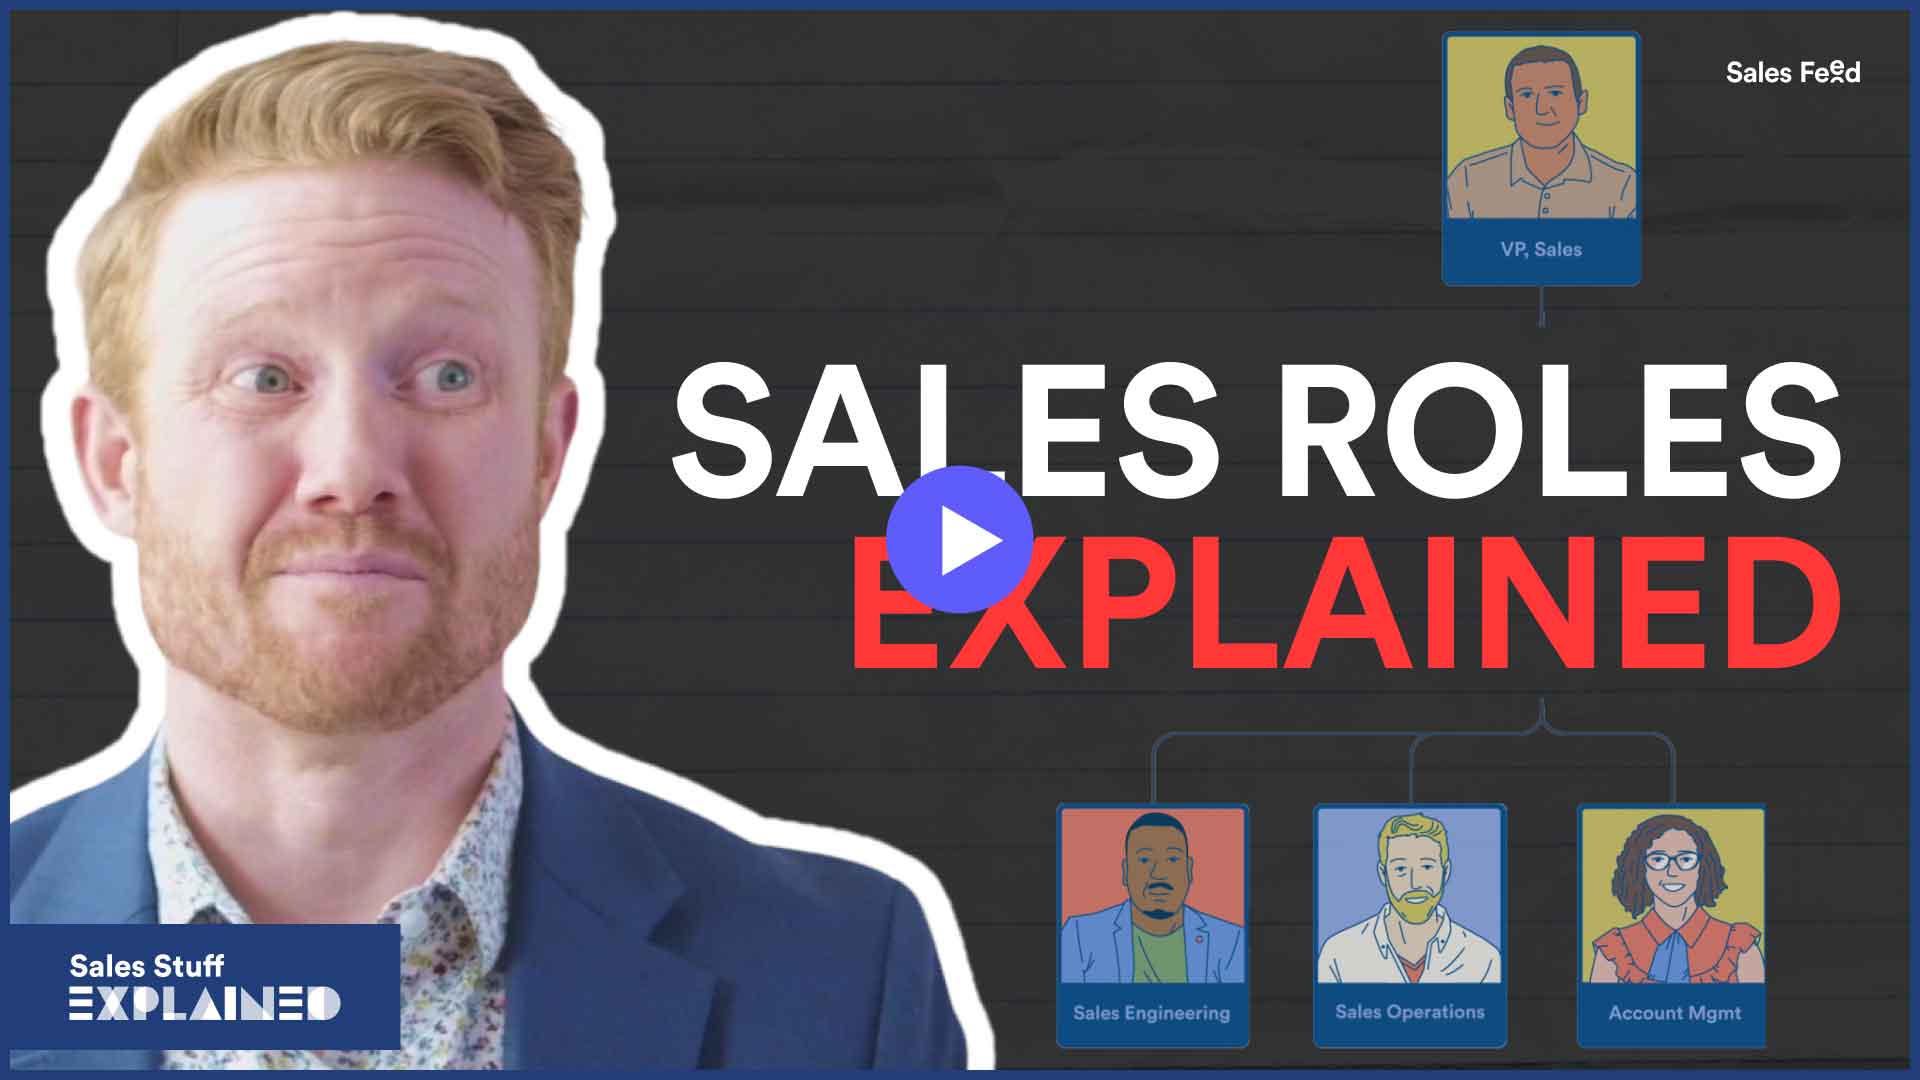 Sales Stuff Explained Video Thumbnail for Sales Organization Structure